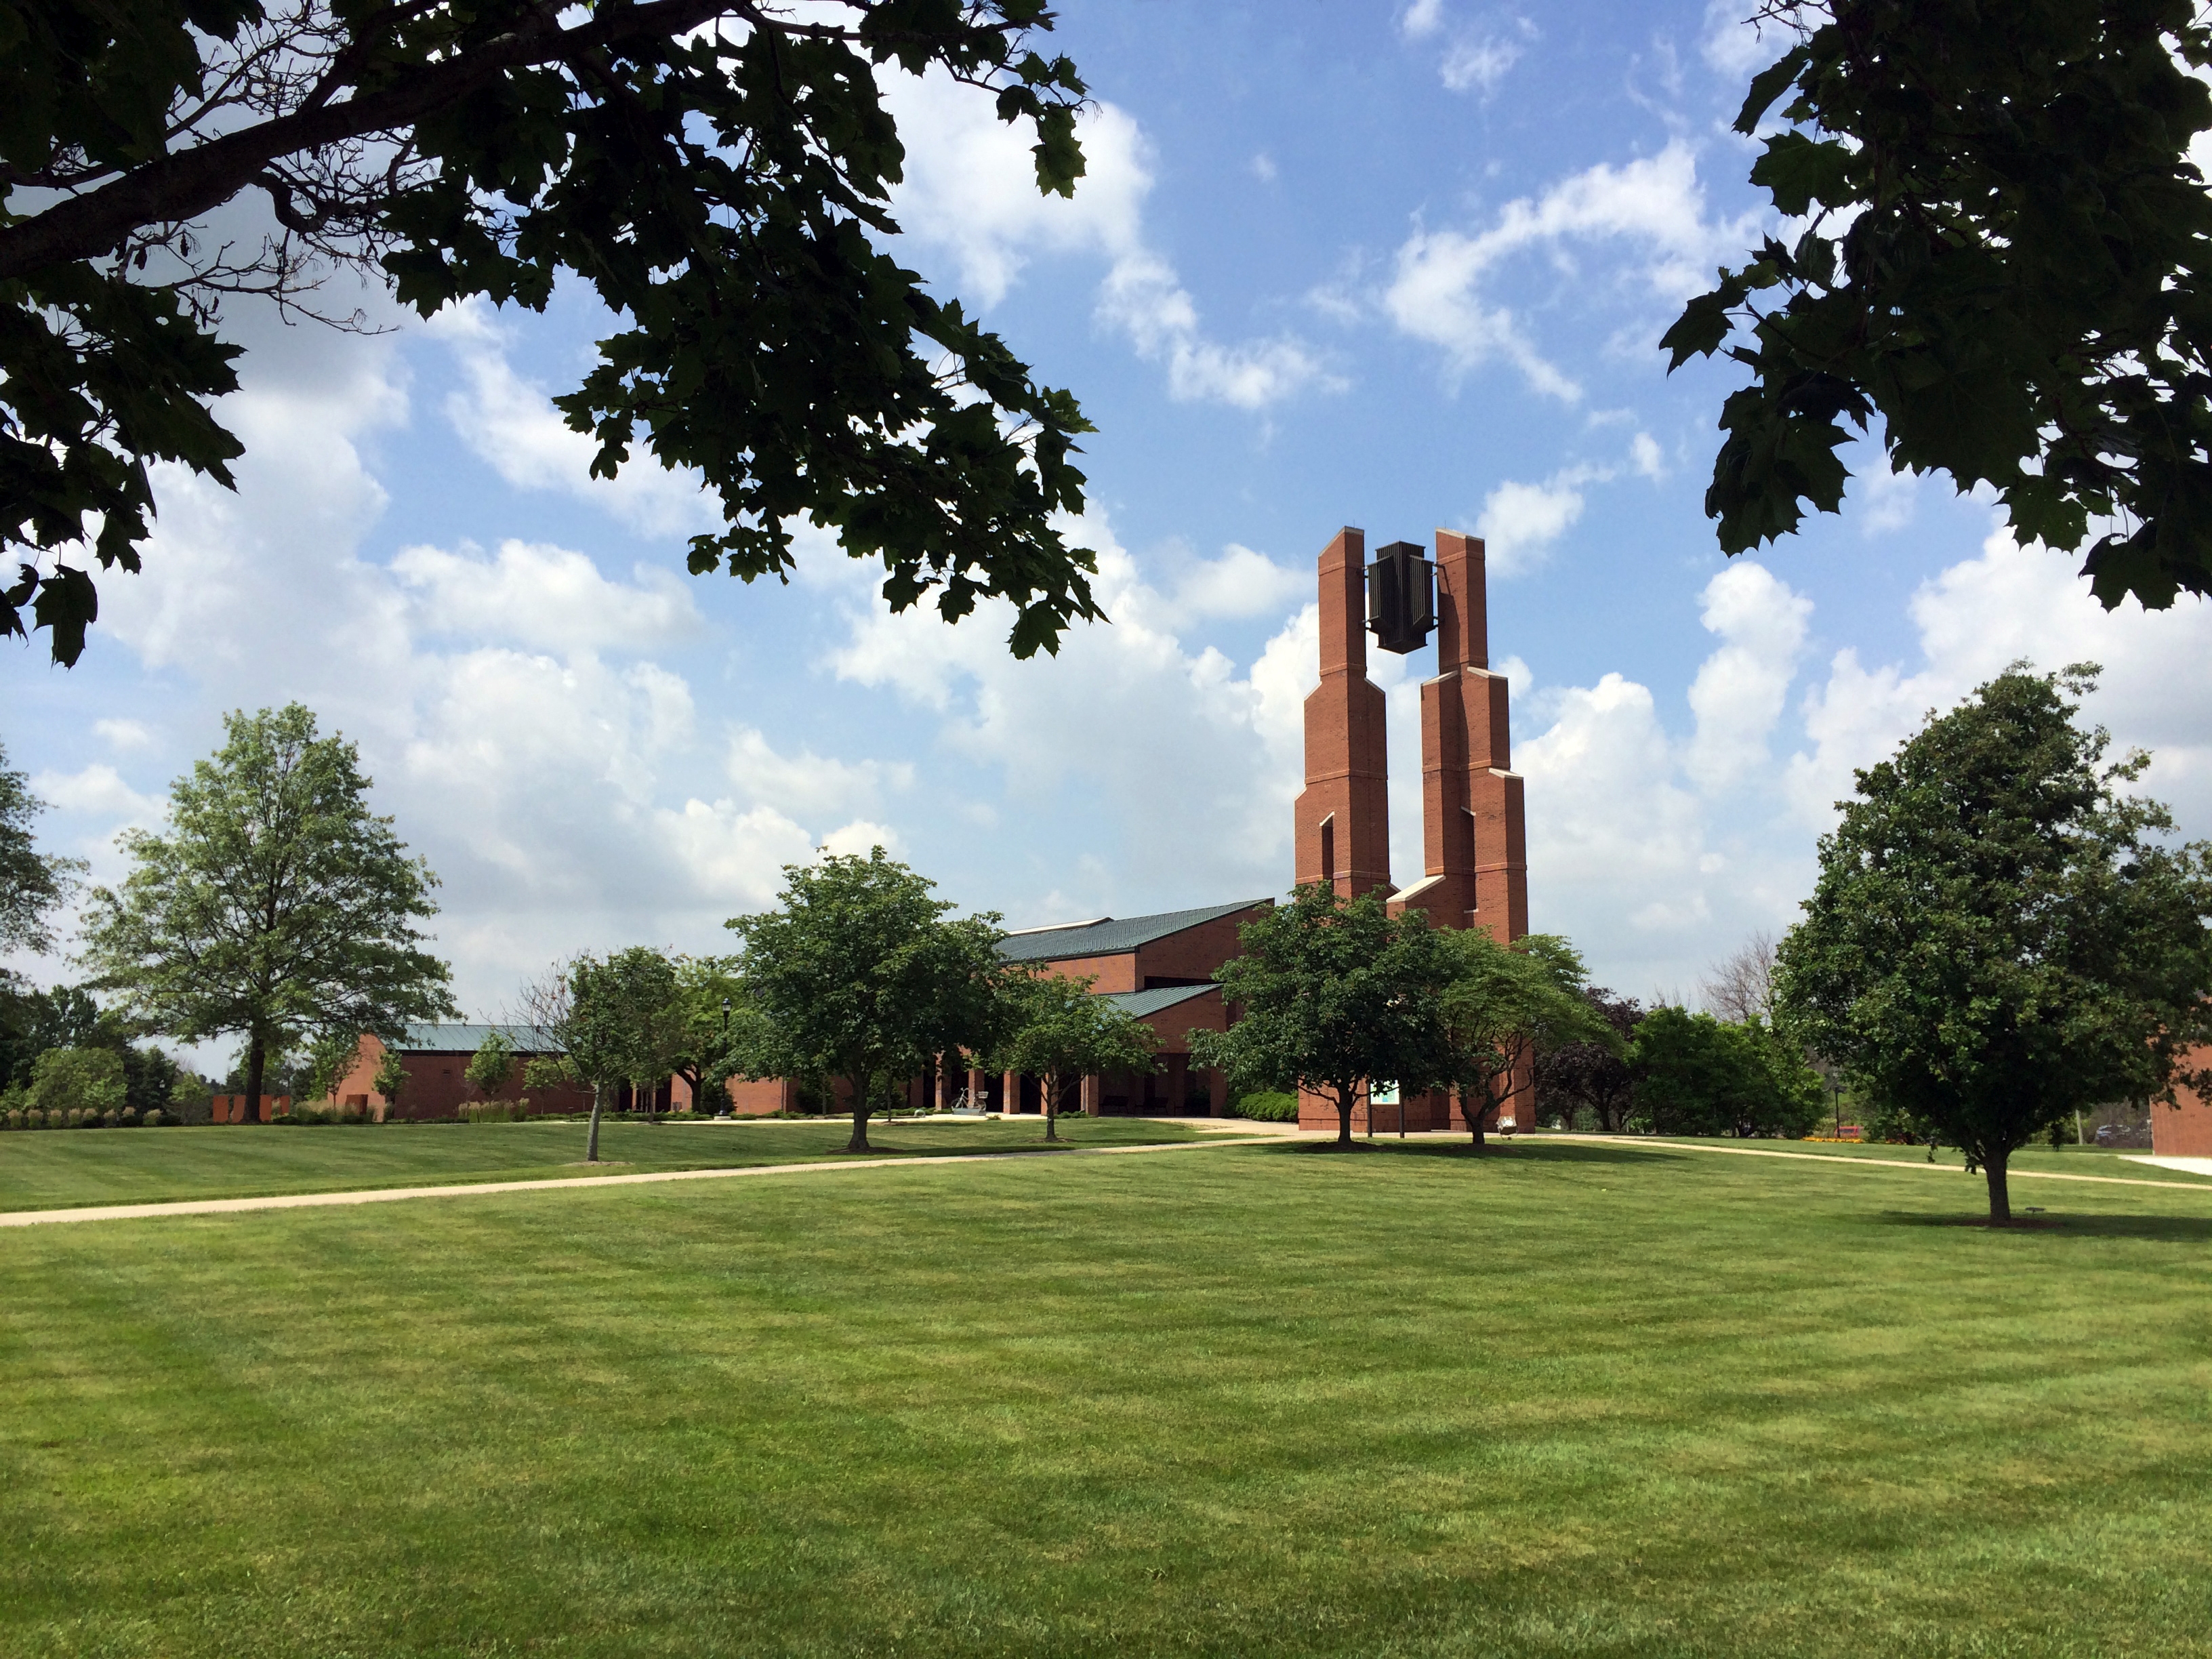 The Zondervan Library and Rice Bell Tower